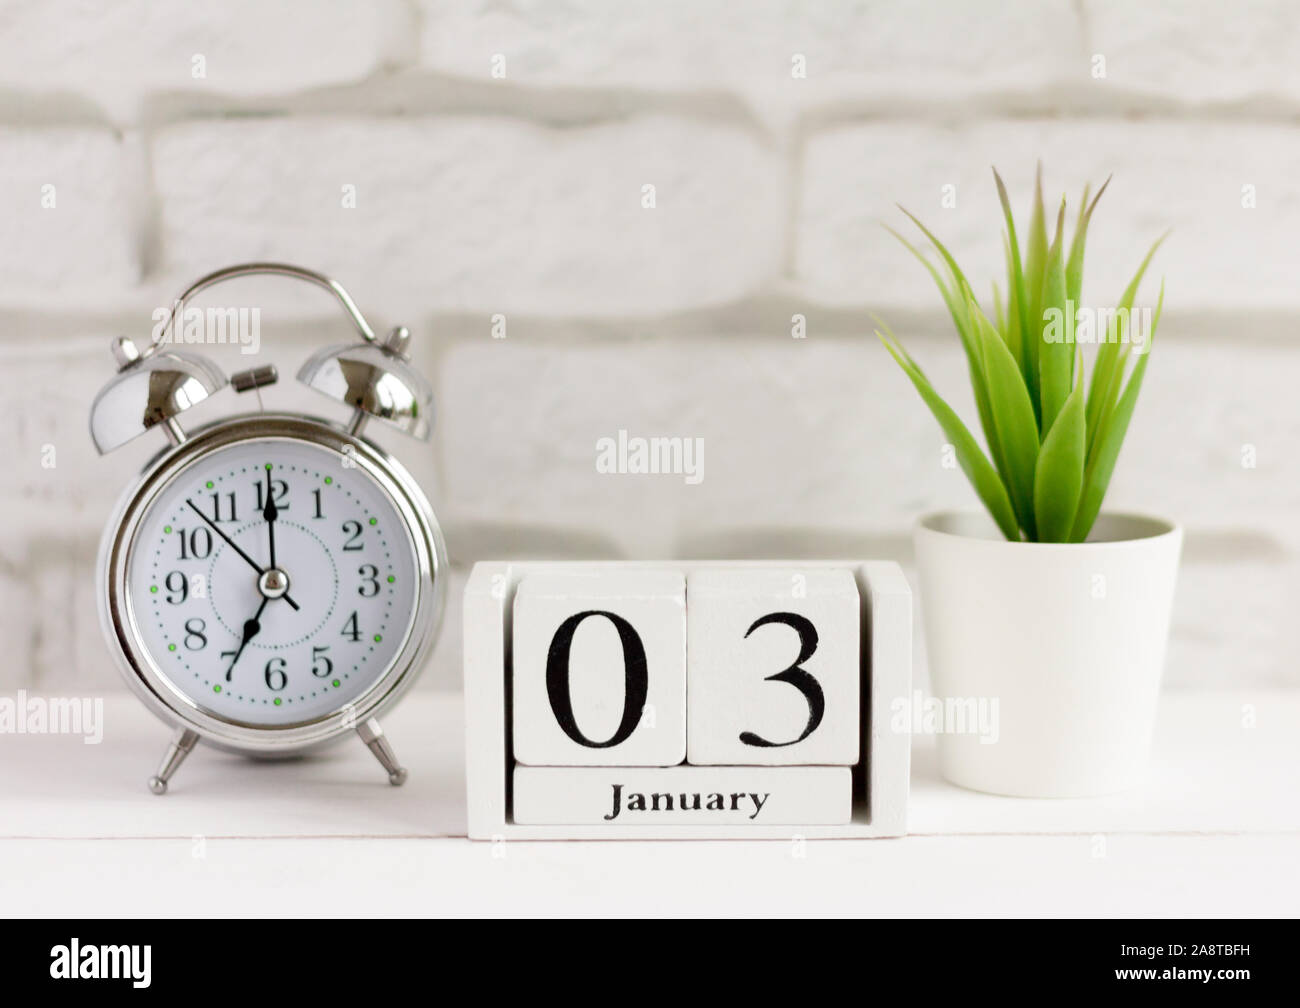 January 3 on the wooden calendar, the beginning of a new day and year Stock Photo